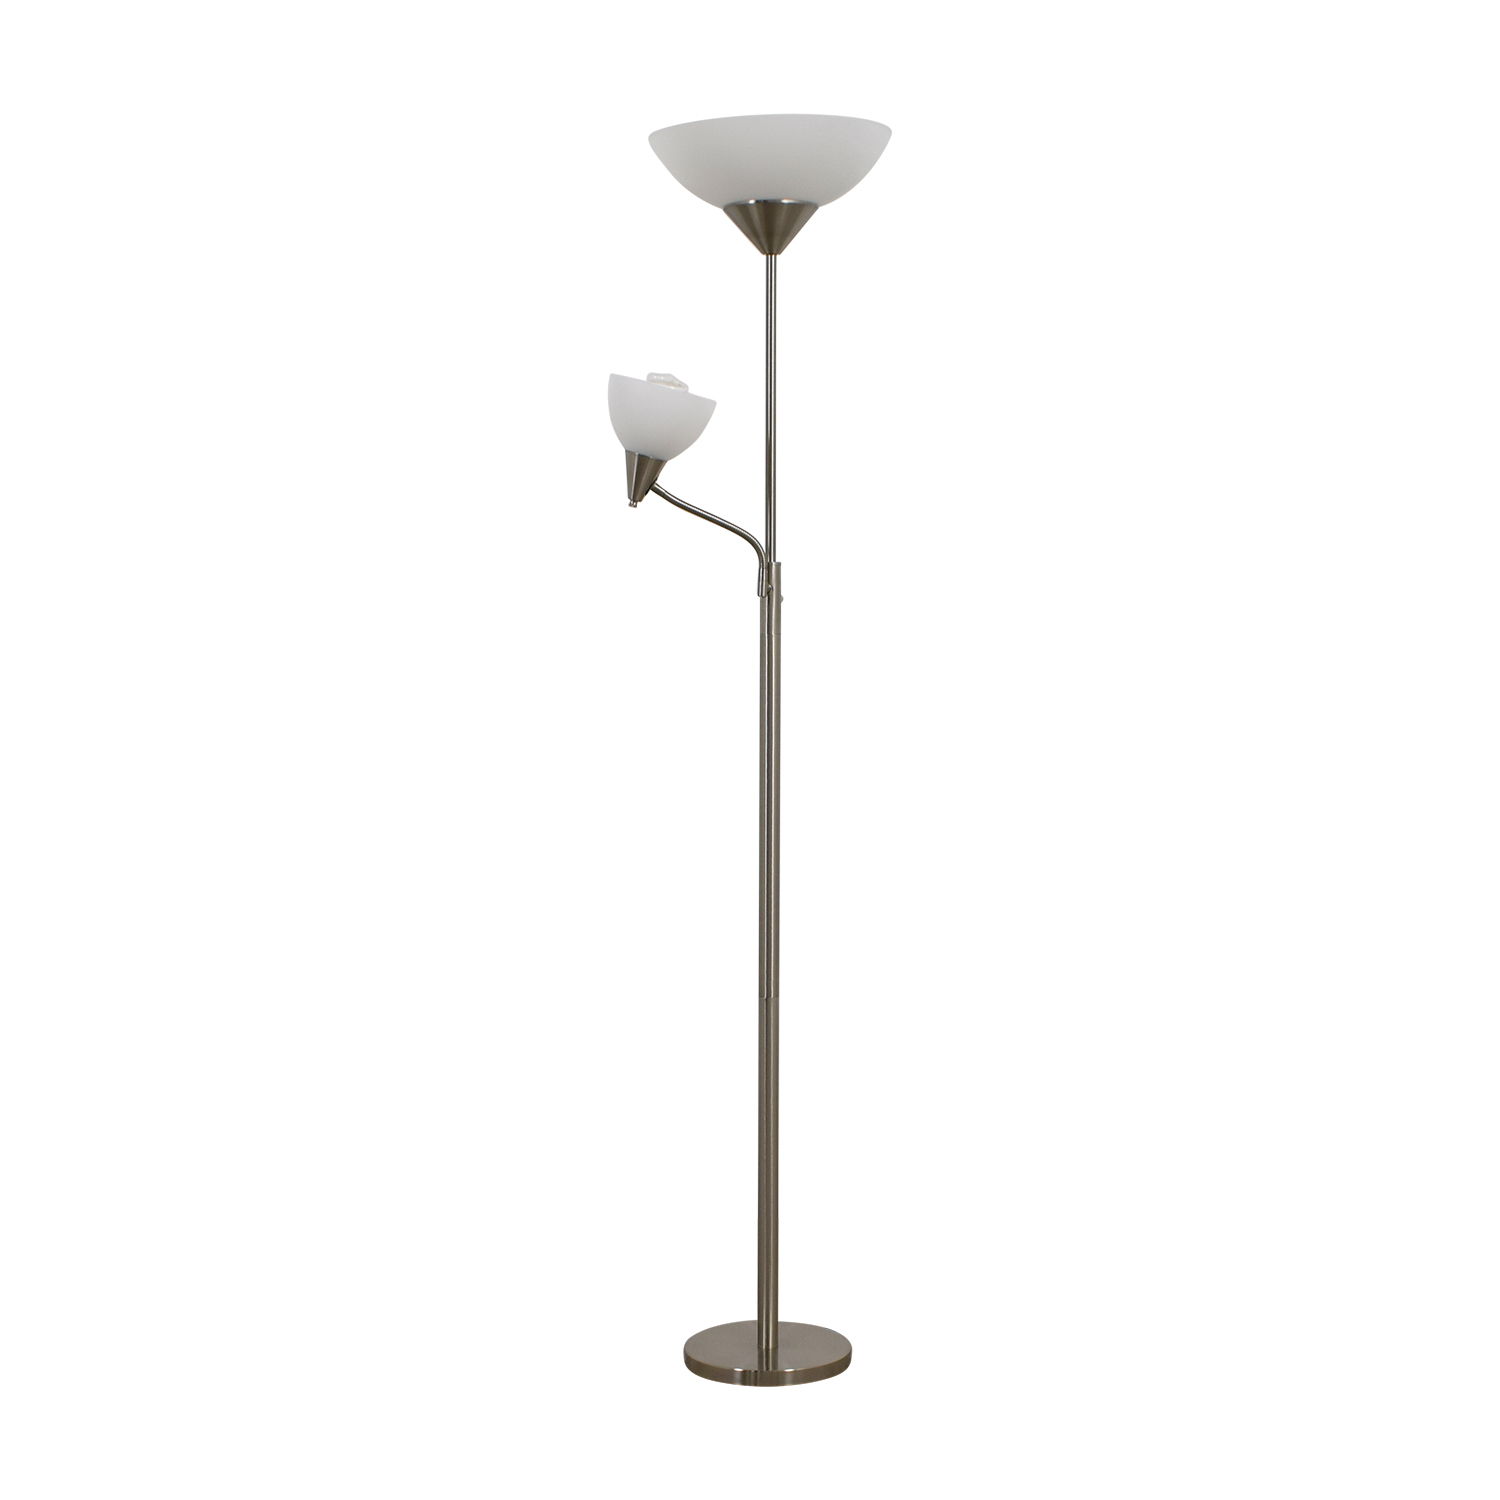 66 Off Bed Bath Beyond Bed Bath And Beyond Silver Floor Lamp Decor intended for size 1500 X 1500